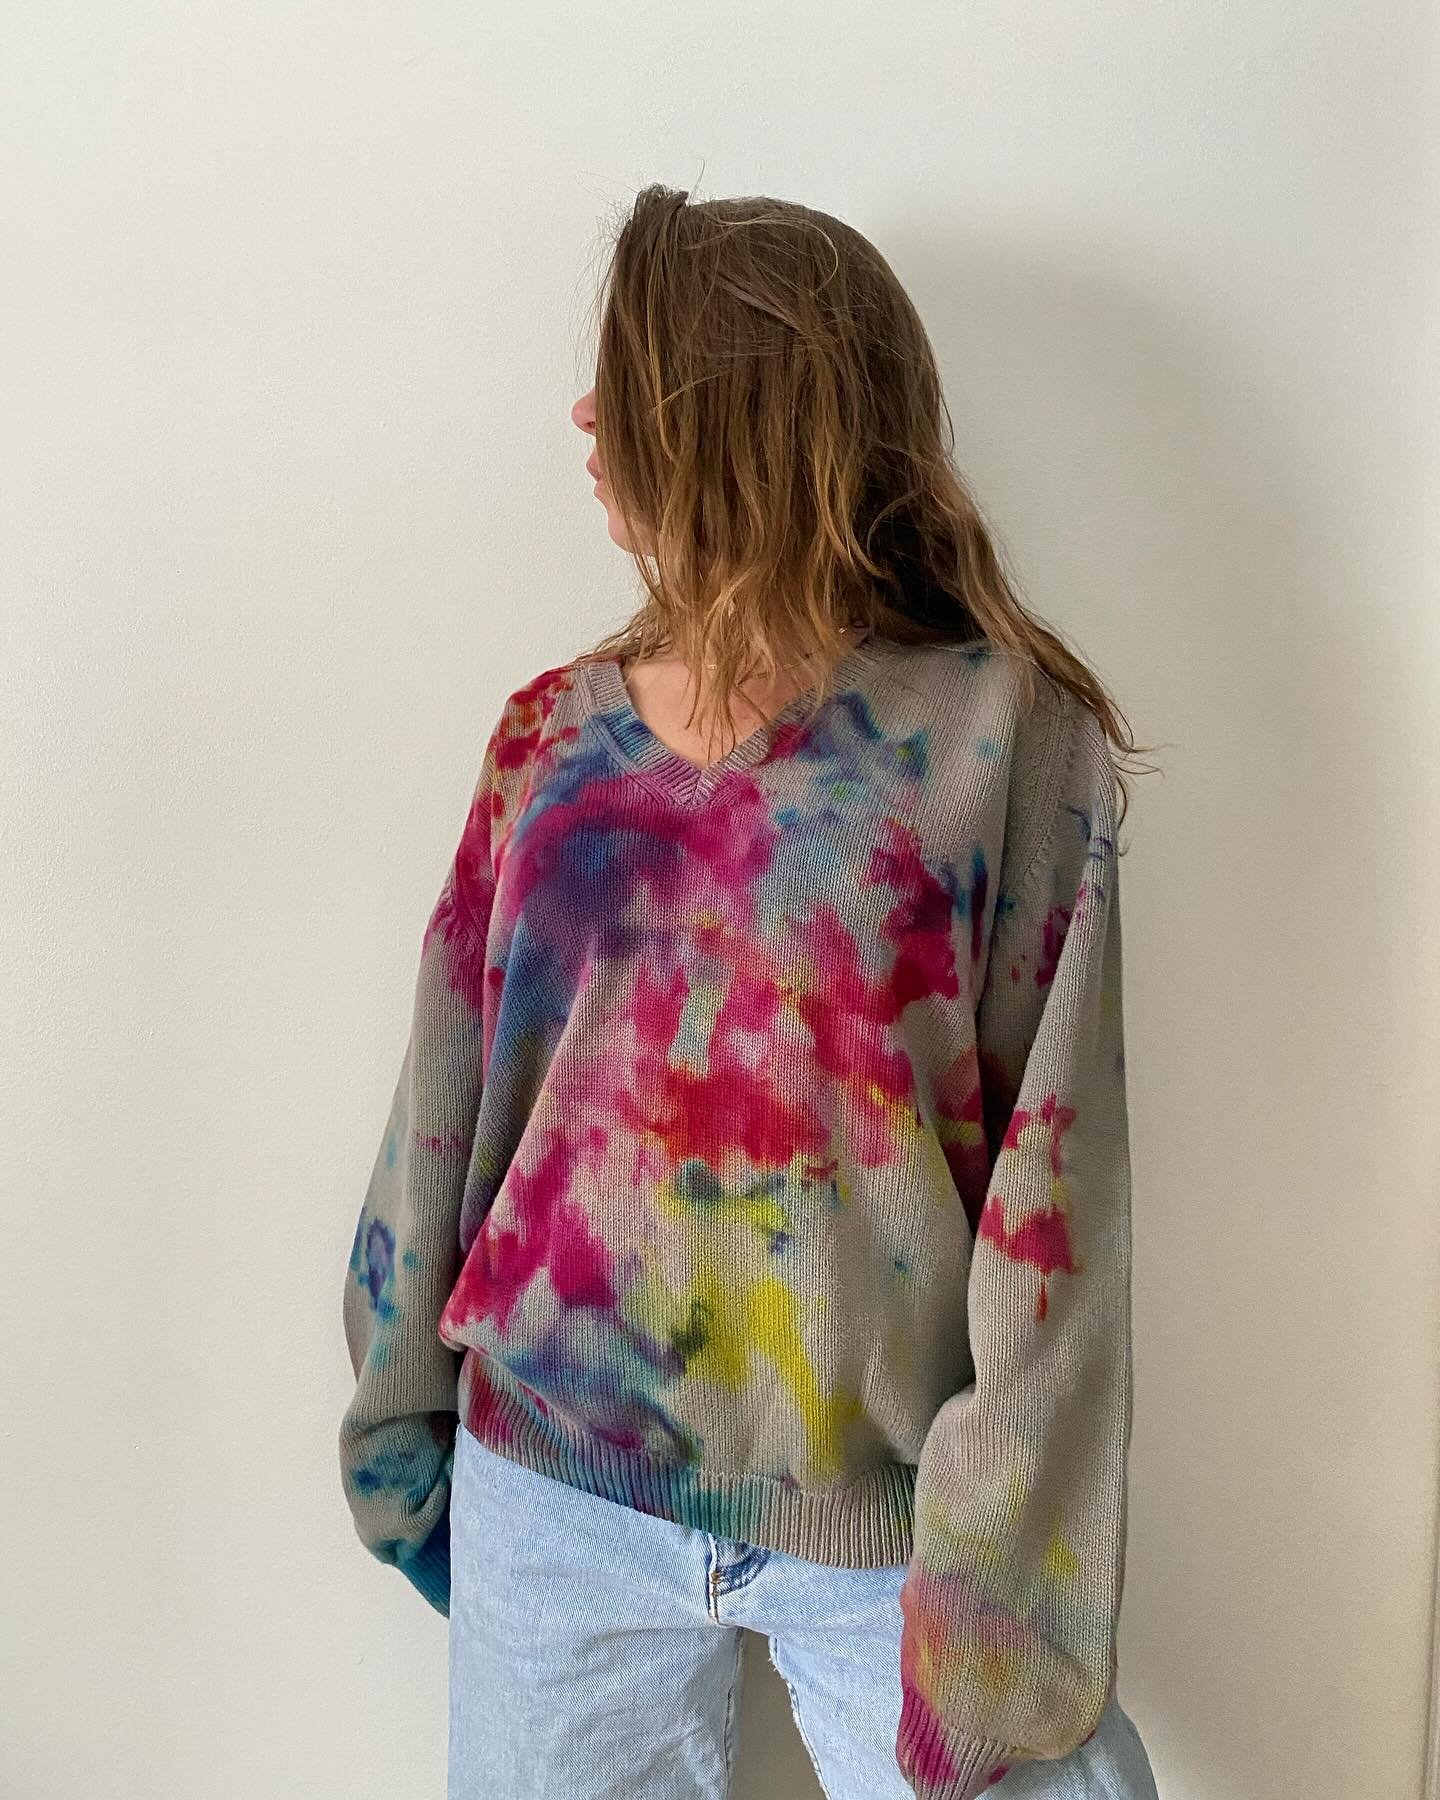 Primrose cotton sweater re-explored 🌺
50&rdquo; chest, 26&rdquo; length

Size large womens 

100% cotton

Re-explored takes vintage pieces and transforms them into something new to extend the life cycle of the garment and keep more textiles out of l